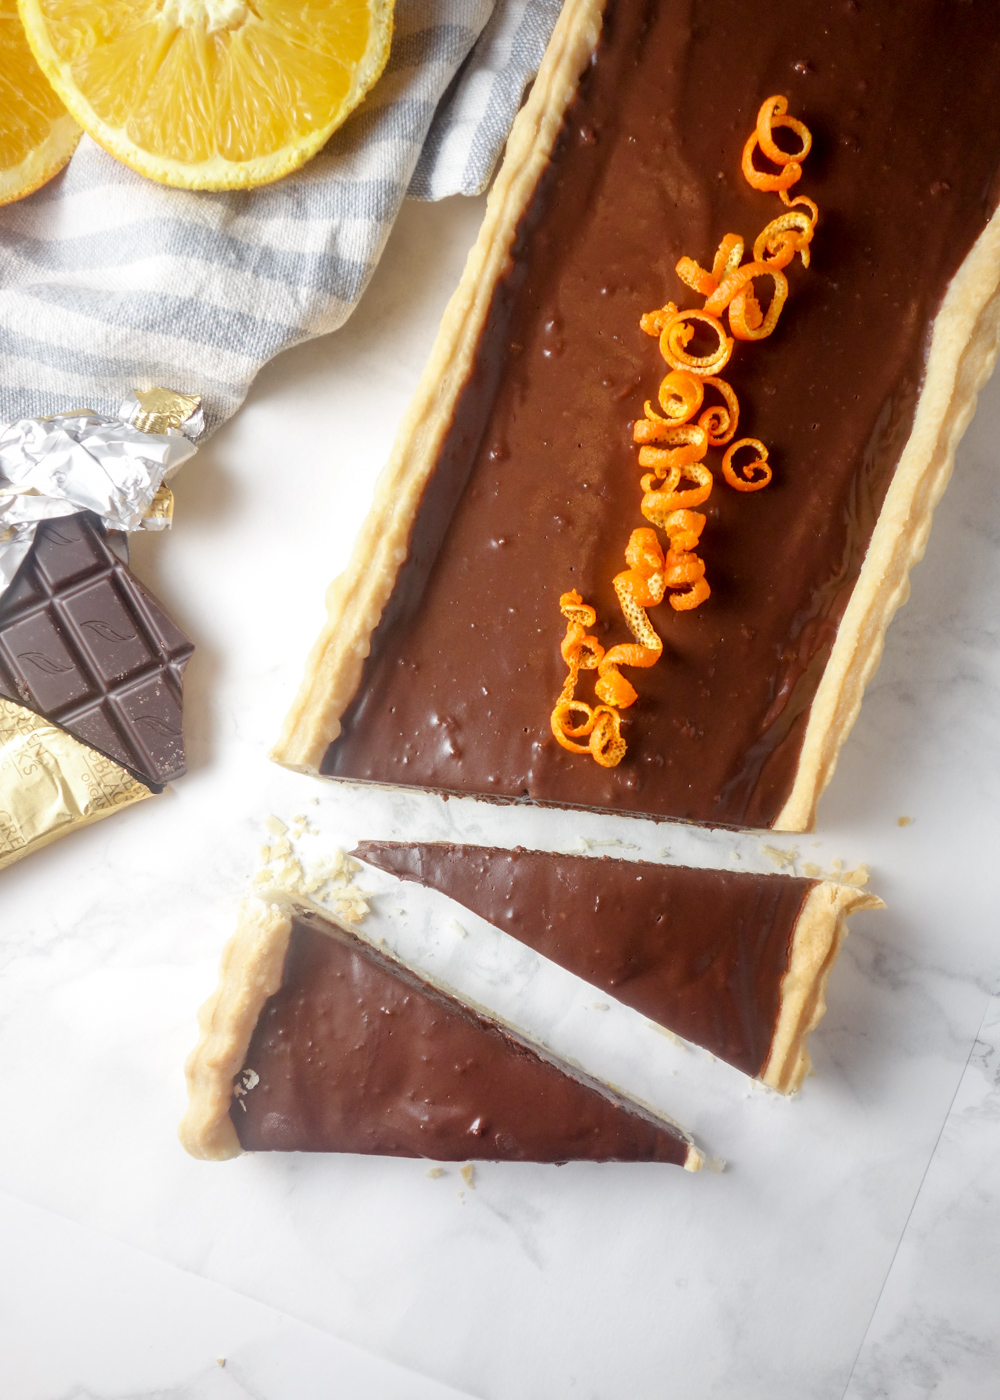 Chocolate Orange Tart: Shortcrust pastry with a light and creamy chocolate orange filling. The perfect make-ahead dessert!